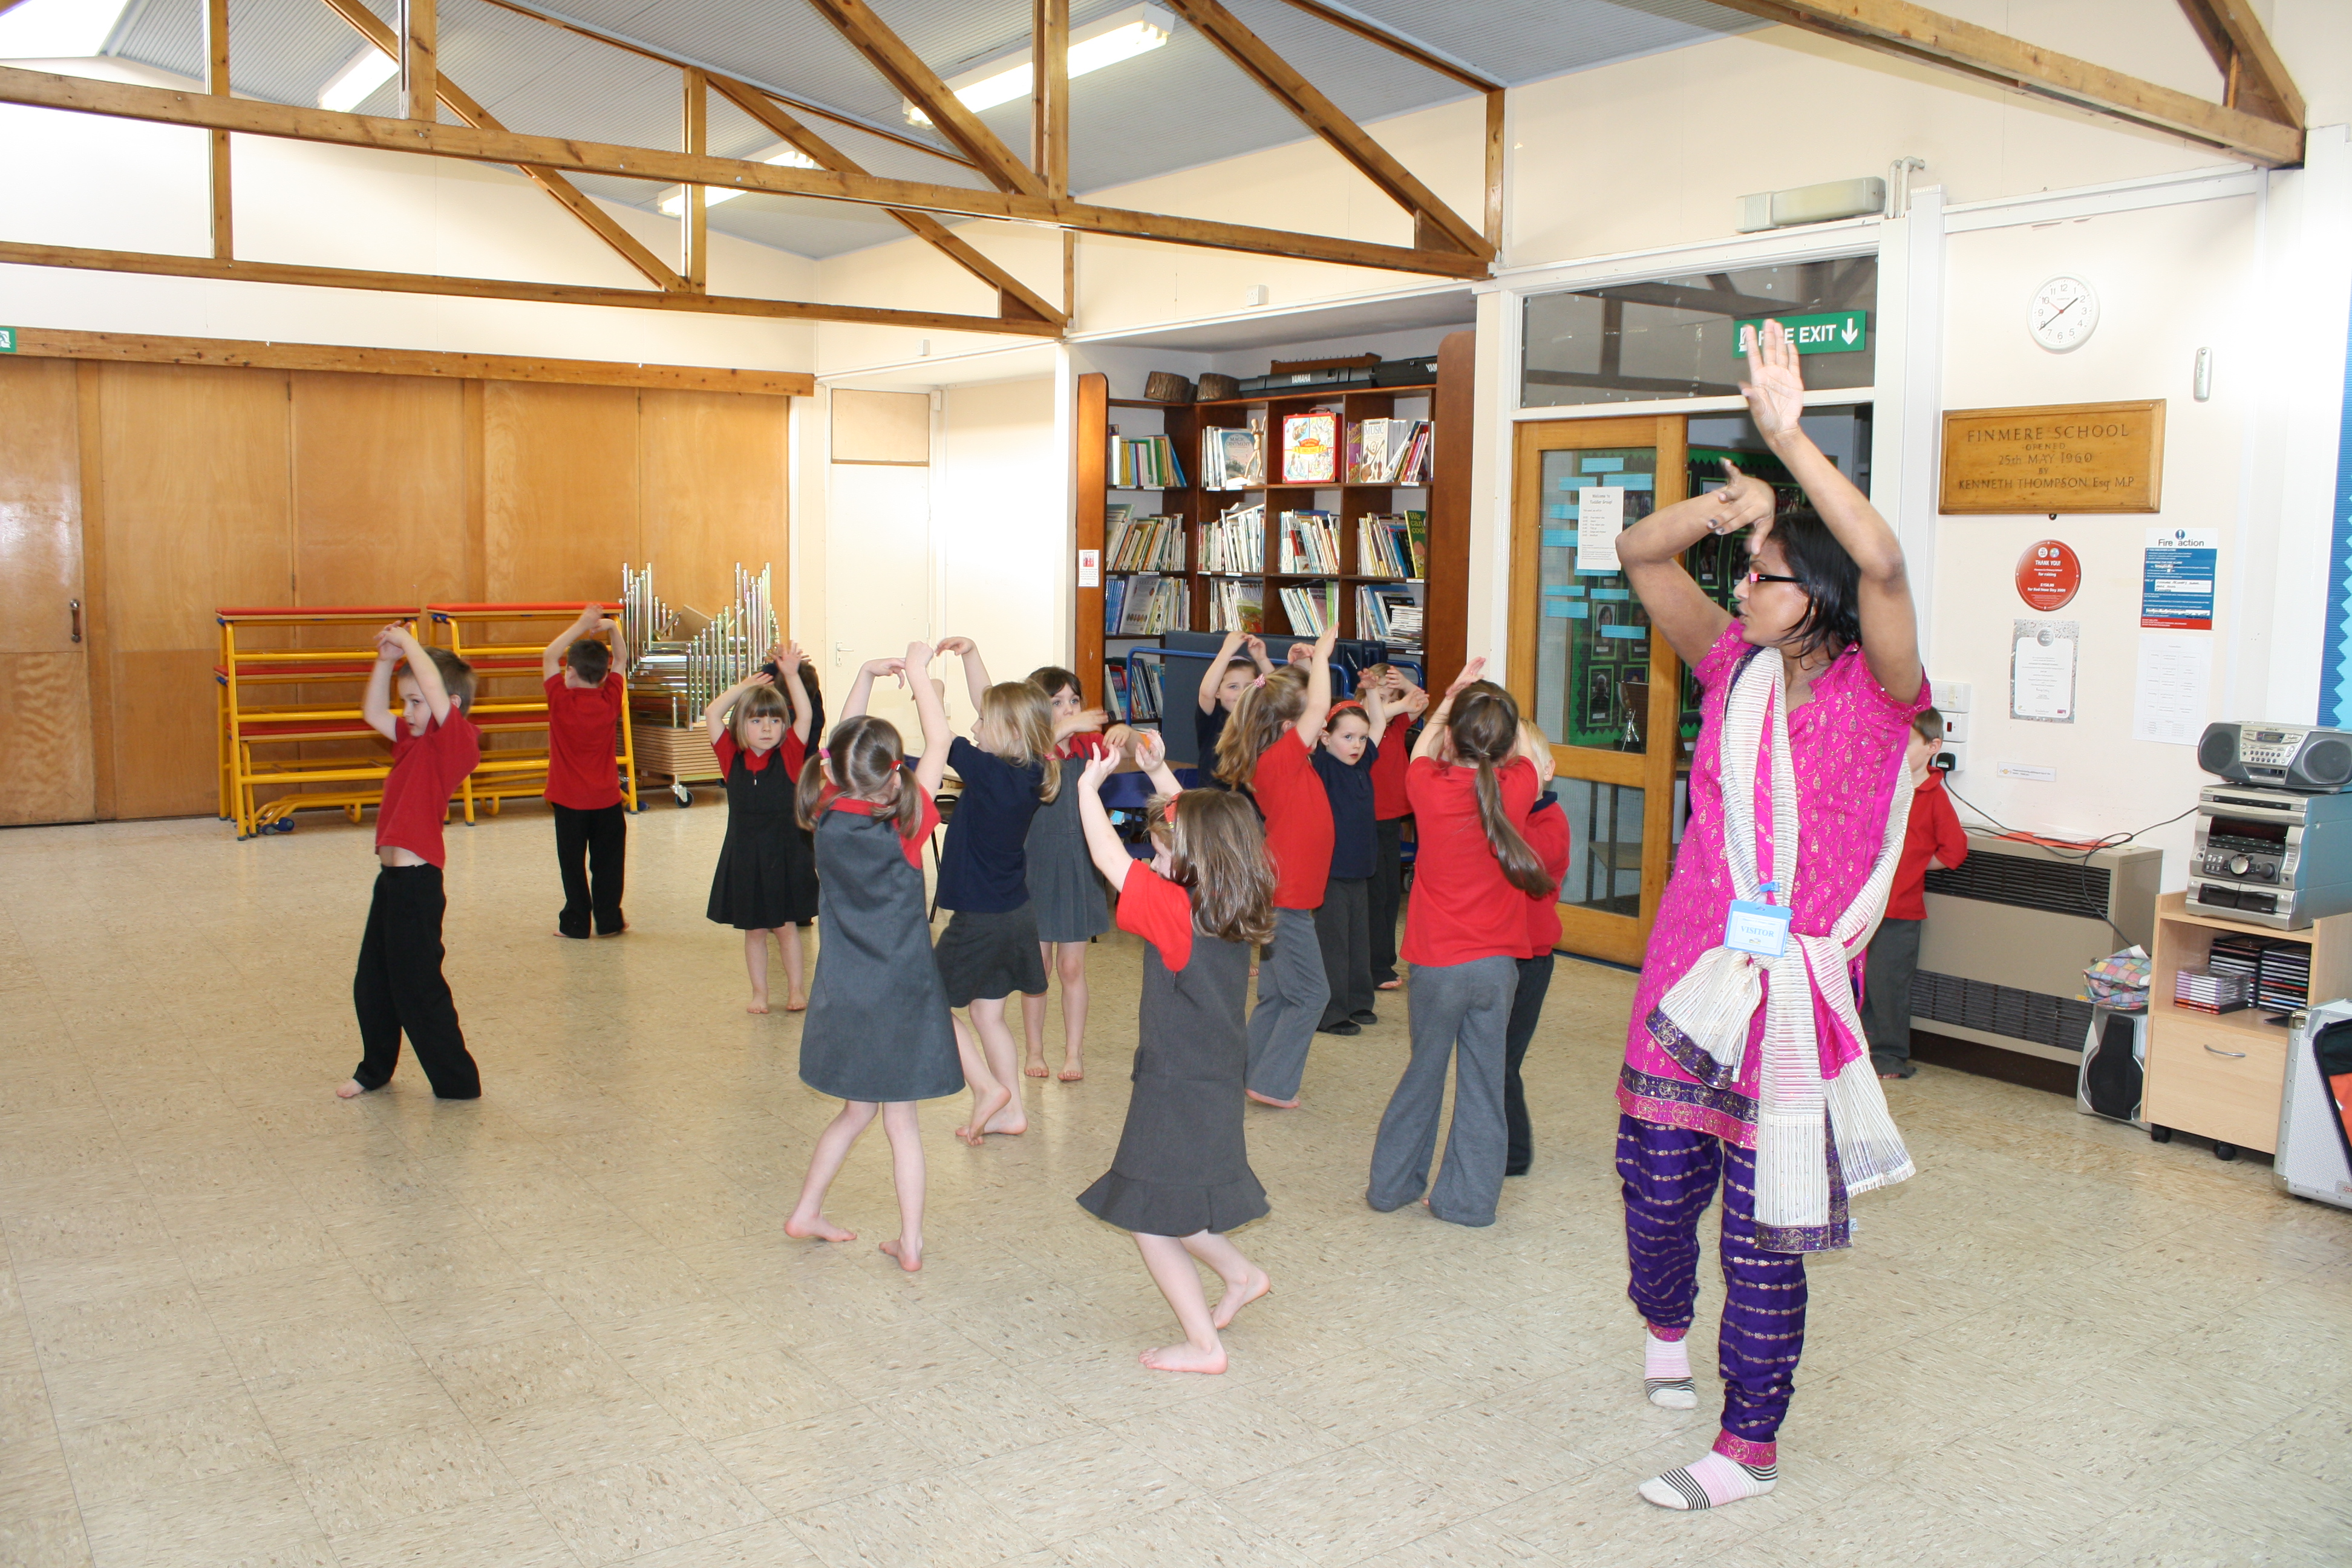 School children dressed in bright Indian clothing learning Indian dance